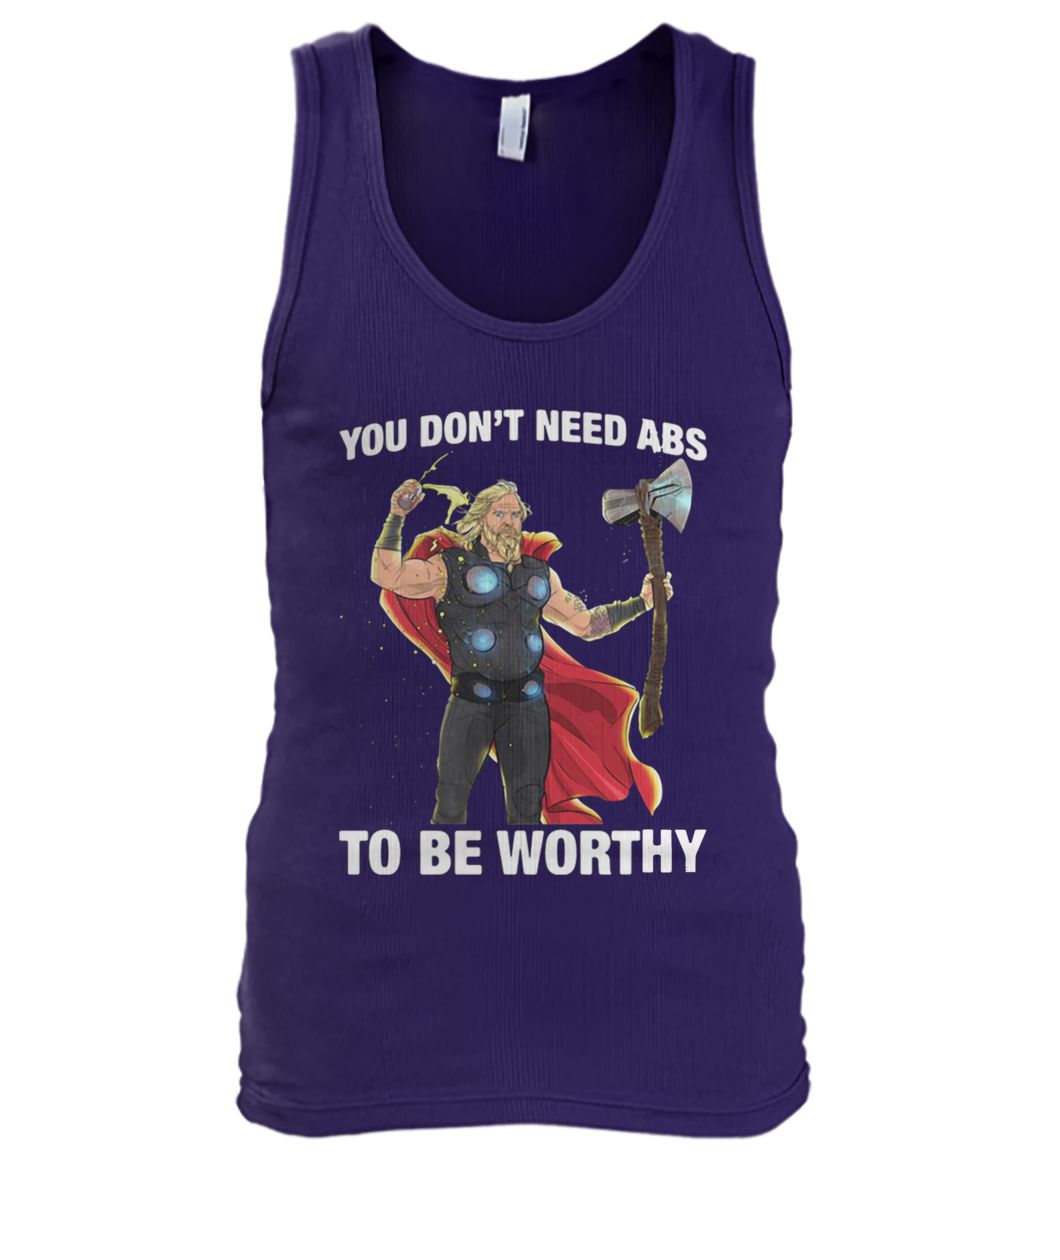 Fat-thor you don't need abs to be worthy men's tank top